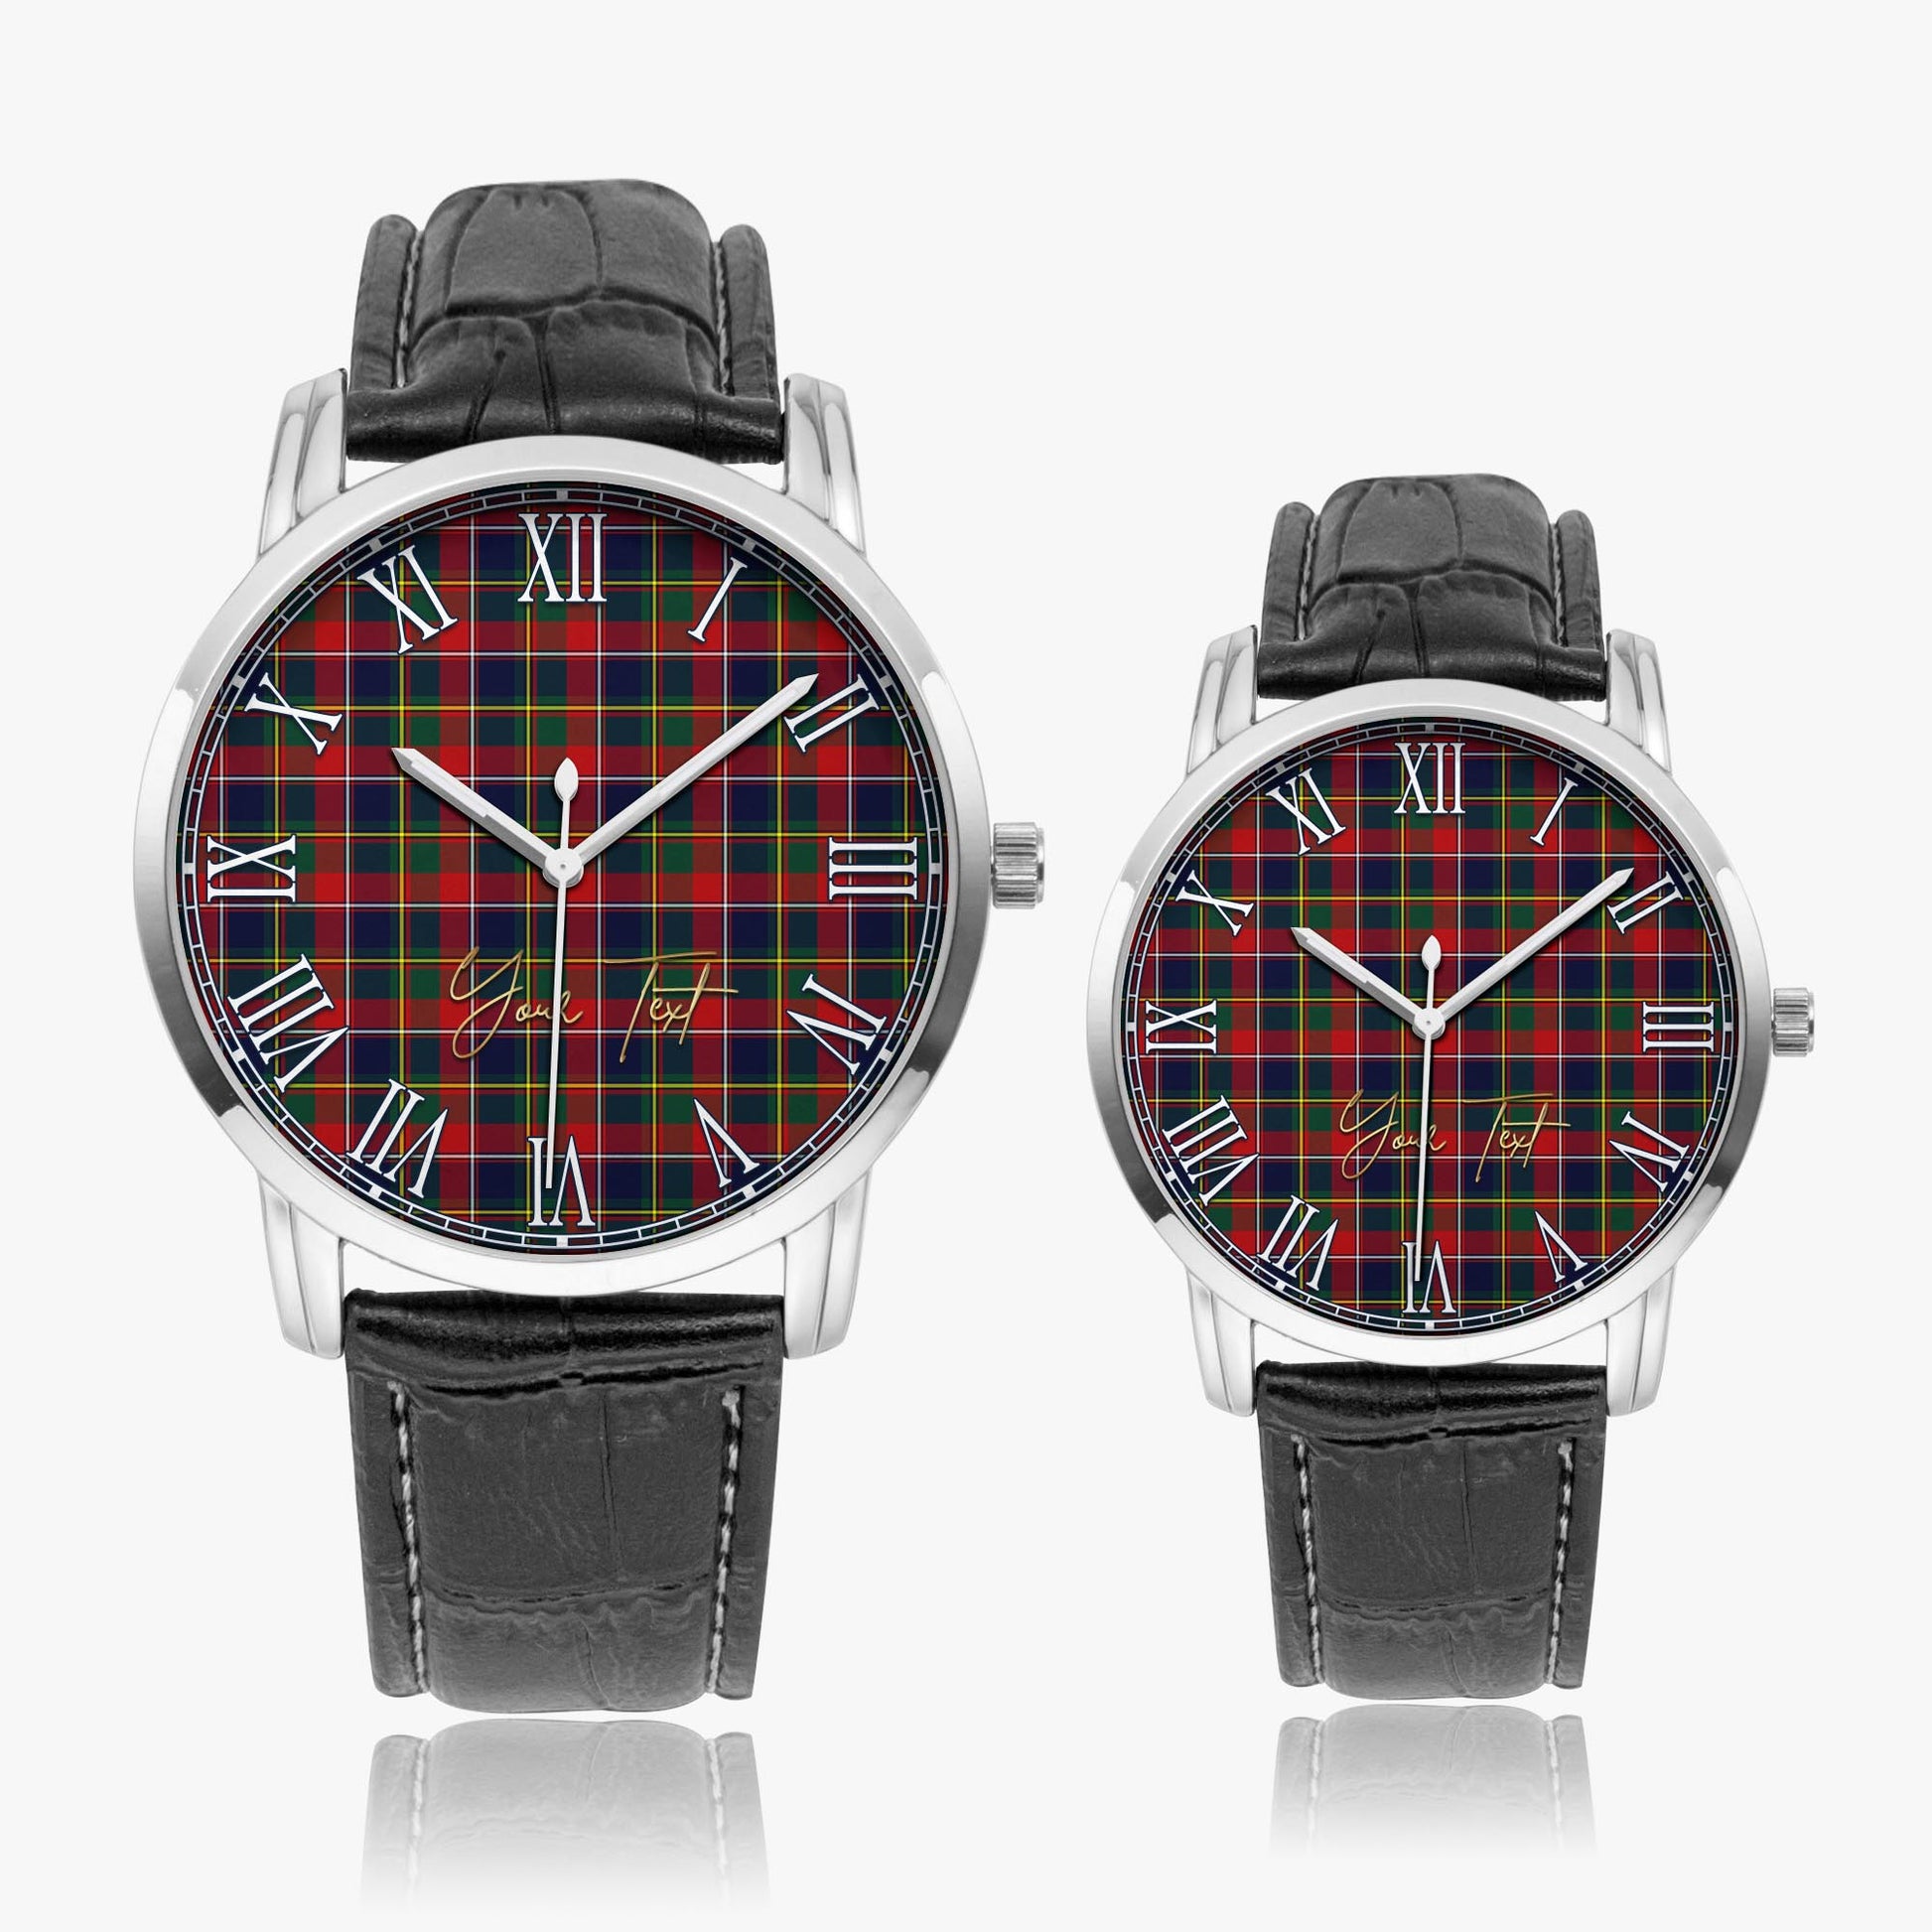 Quebec Province Canada Tartan Personalized Your Text Leather Trap Quartz Watch Wide Type Silver Case With Black Leather Strap - Tartanvibesclothing